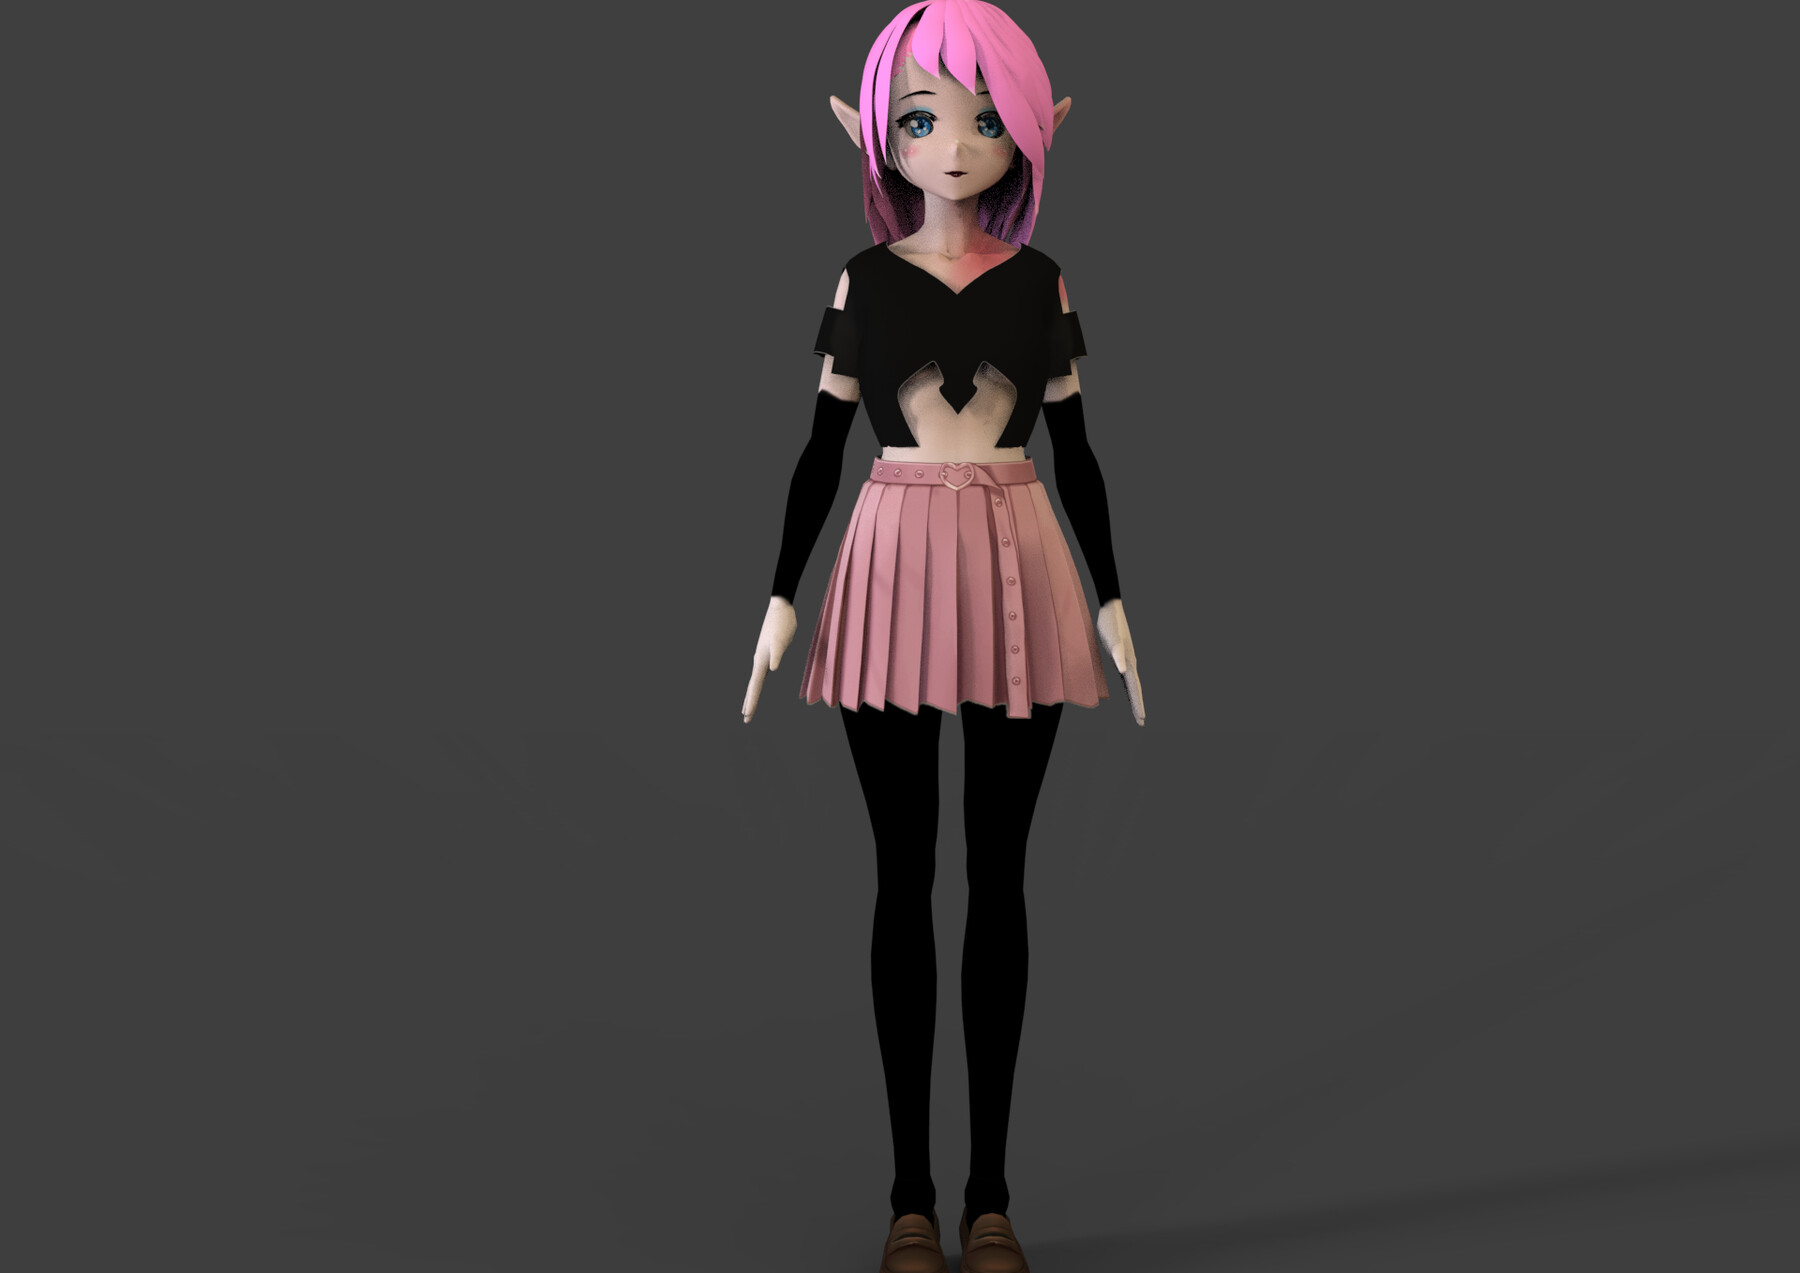 anime girl game character Low-poly Modelo 3D